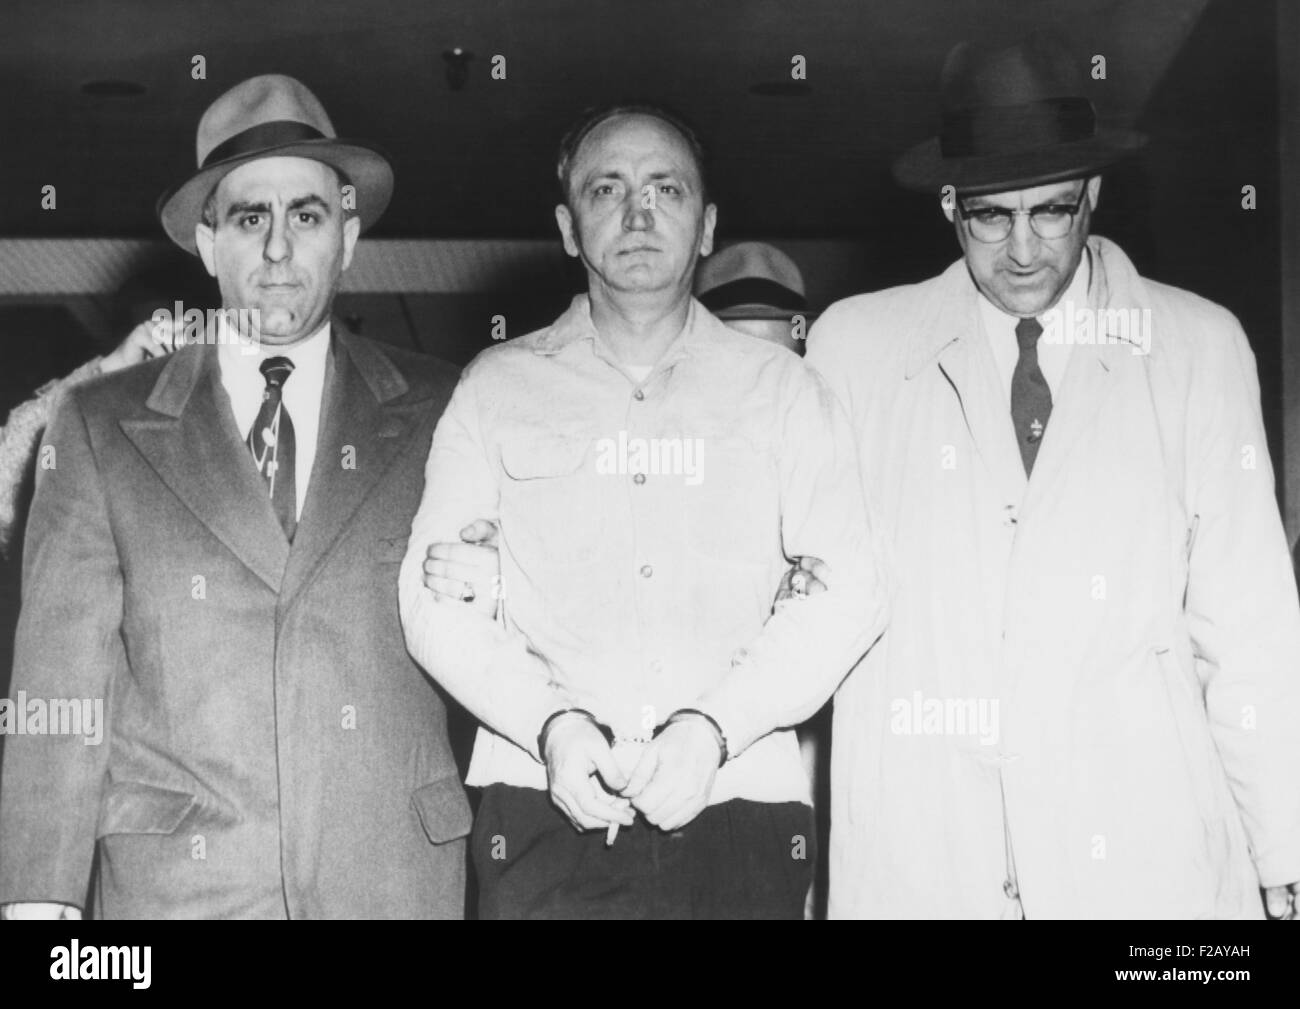 FBI agents escort James I. Faherty, 44, after his arrest for the $1,219,000 Brinks robbery. He was arrested with Thomas F. Richardson without a fight in Dorchester section of Boston. May 16, 1956. Four movies have been based on the robbery: SIX BRIDGES TO CROSS, 1955; BLUEPRINT FOR ROBBERY, 1961; BRINKS-THE GREAT ROBBERY, 1976; THE BRINKS JOB, 1978. (CSU 2015 9 812) Stock Photo